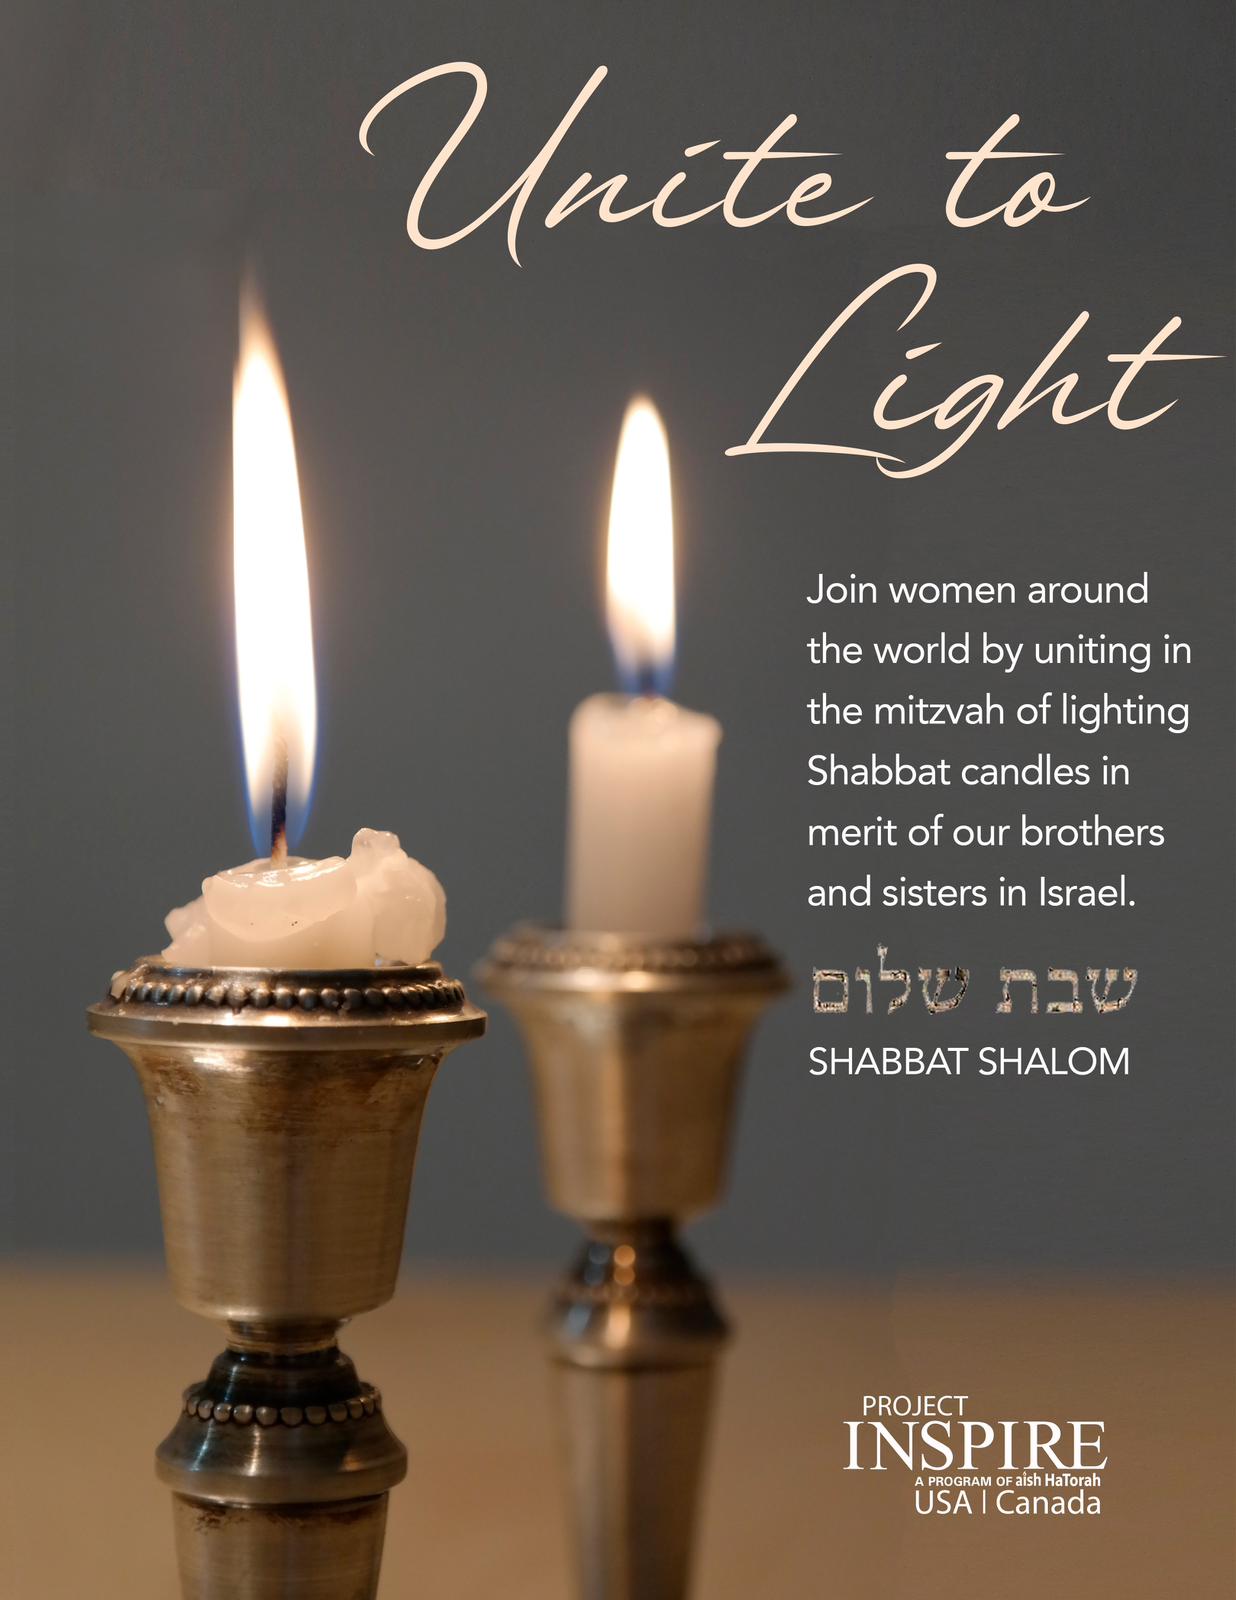 Light Shabbos Candles Every Friday Night